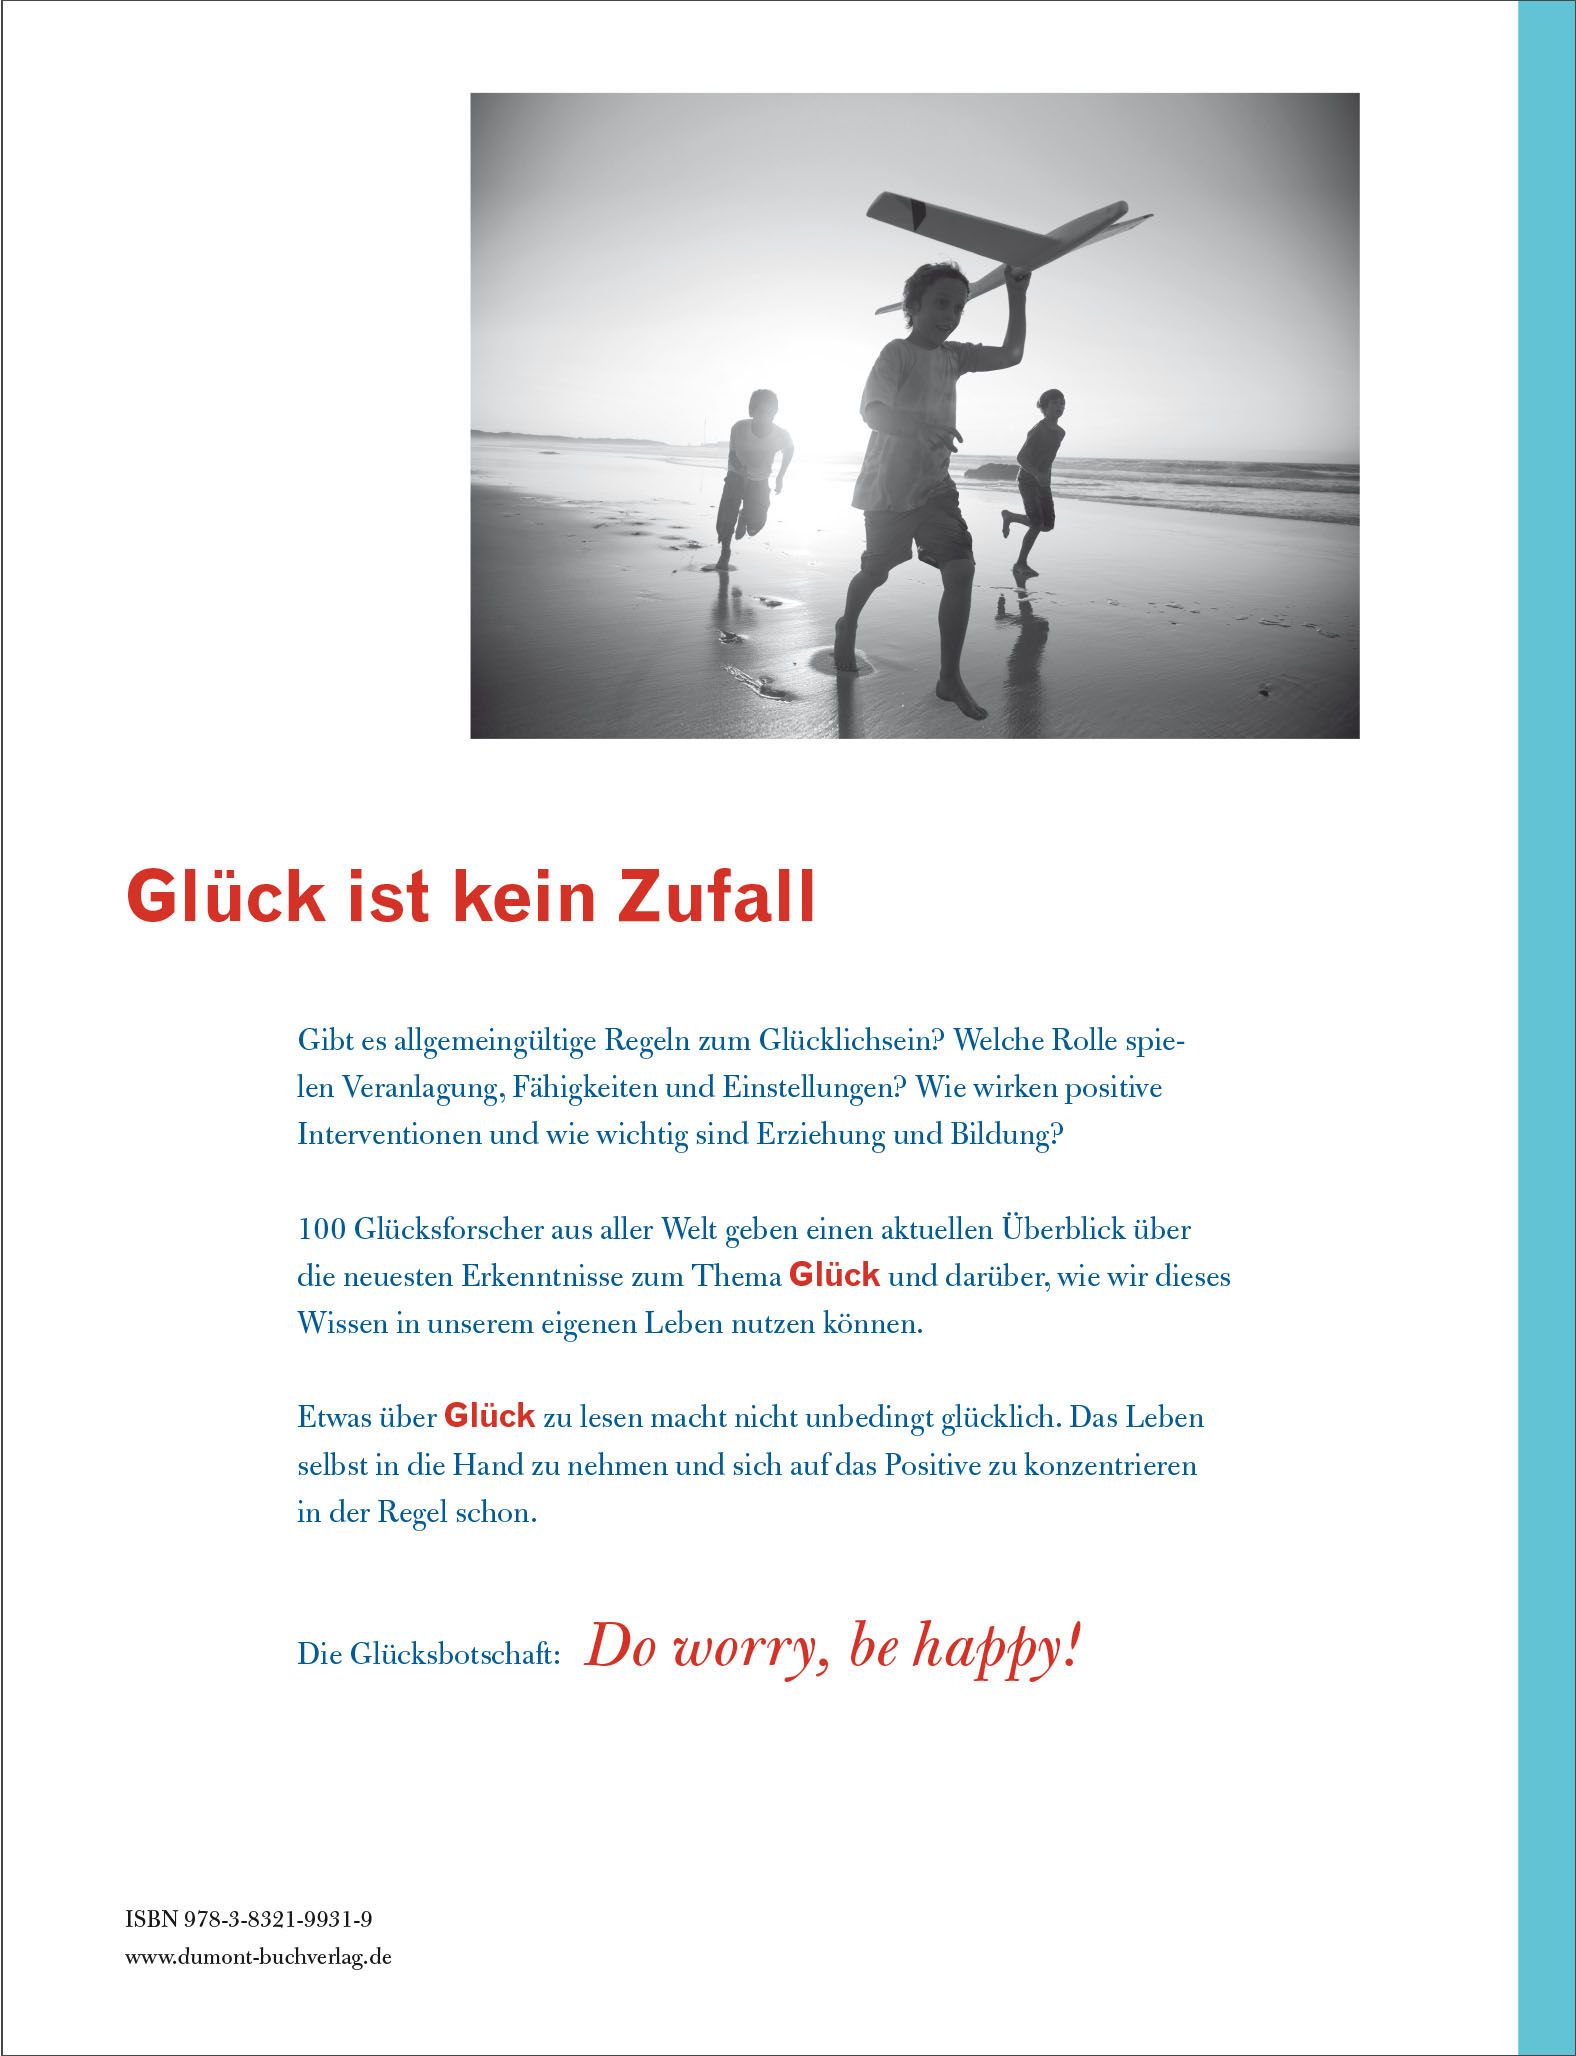 Glück. The New World Book of Happiness